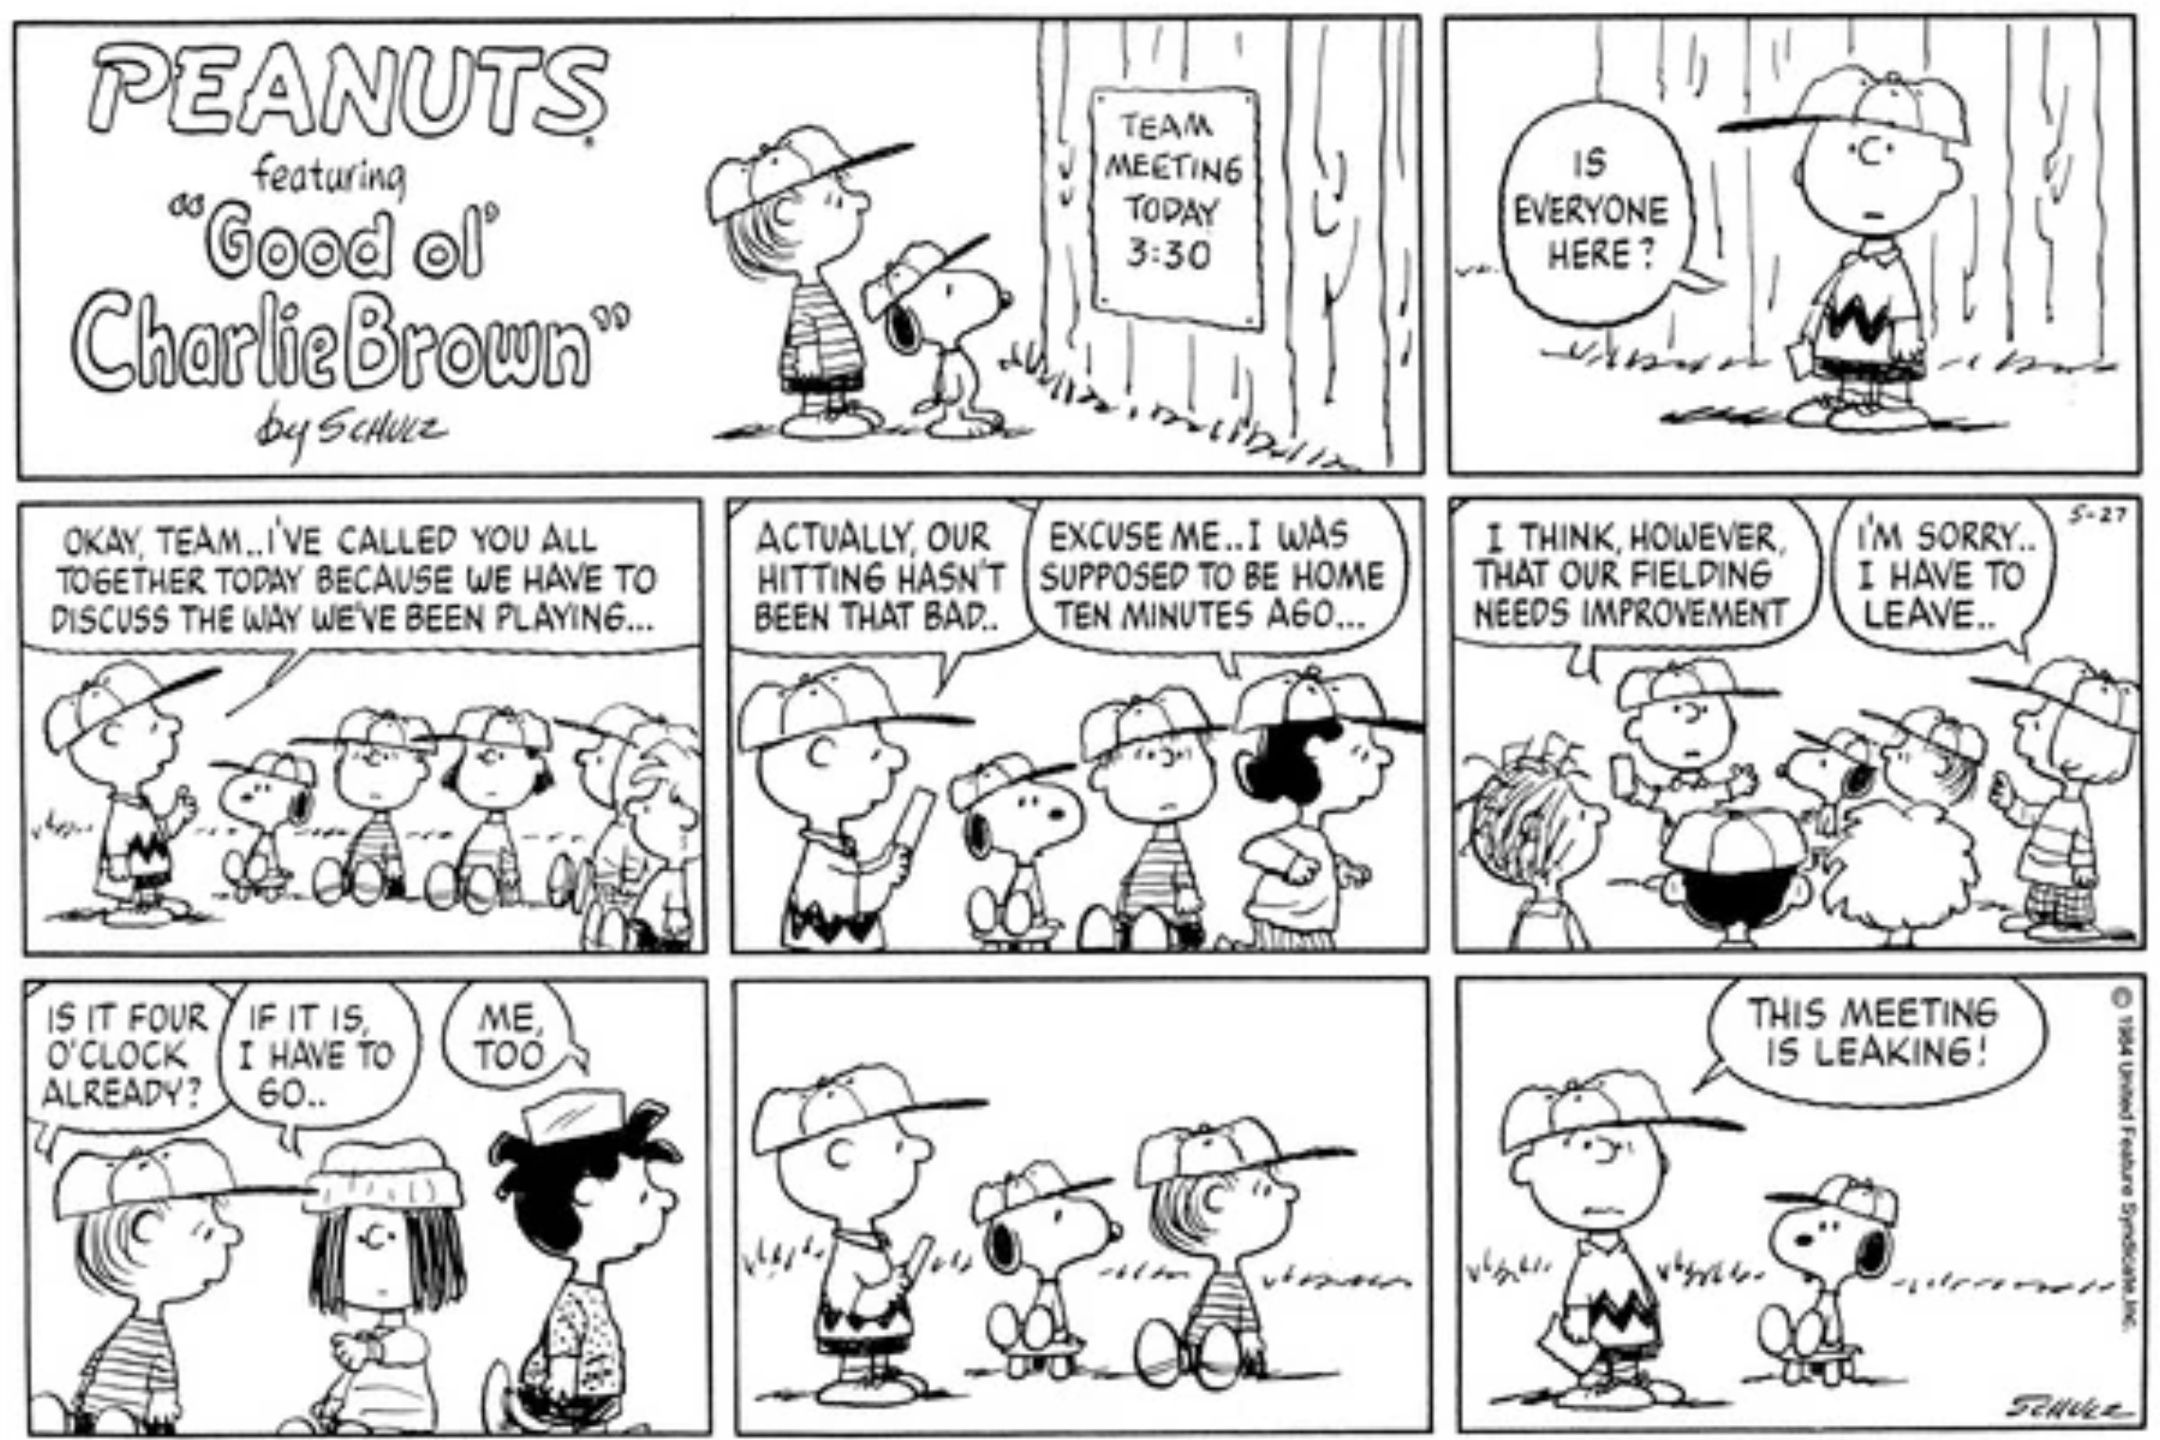 Peanuts, Charlie Brown holds a meeting for the baseball team, but its members steadily lose interest and leave.